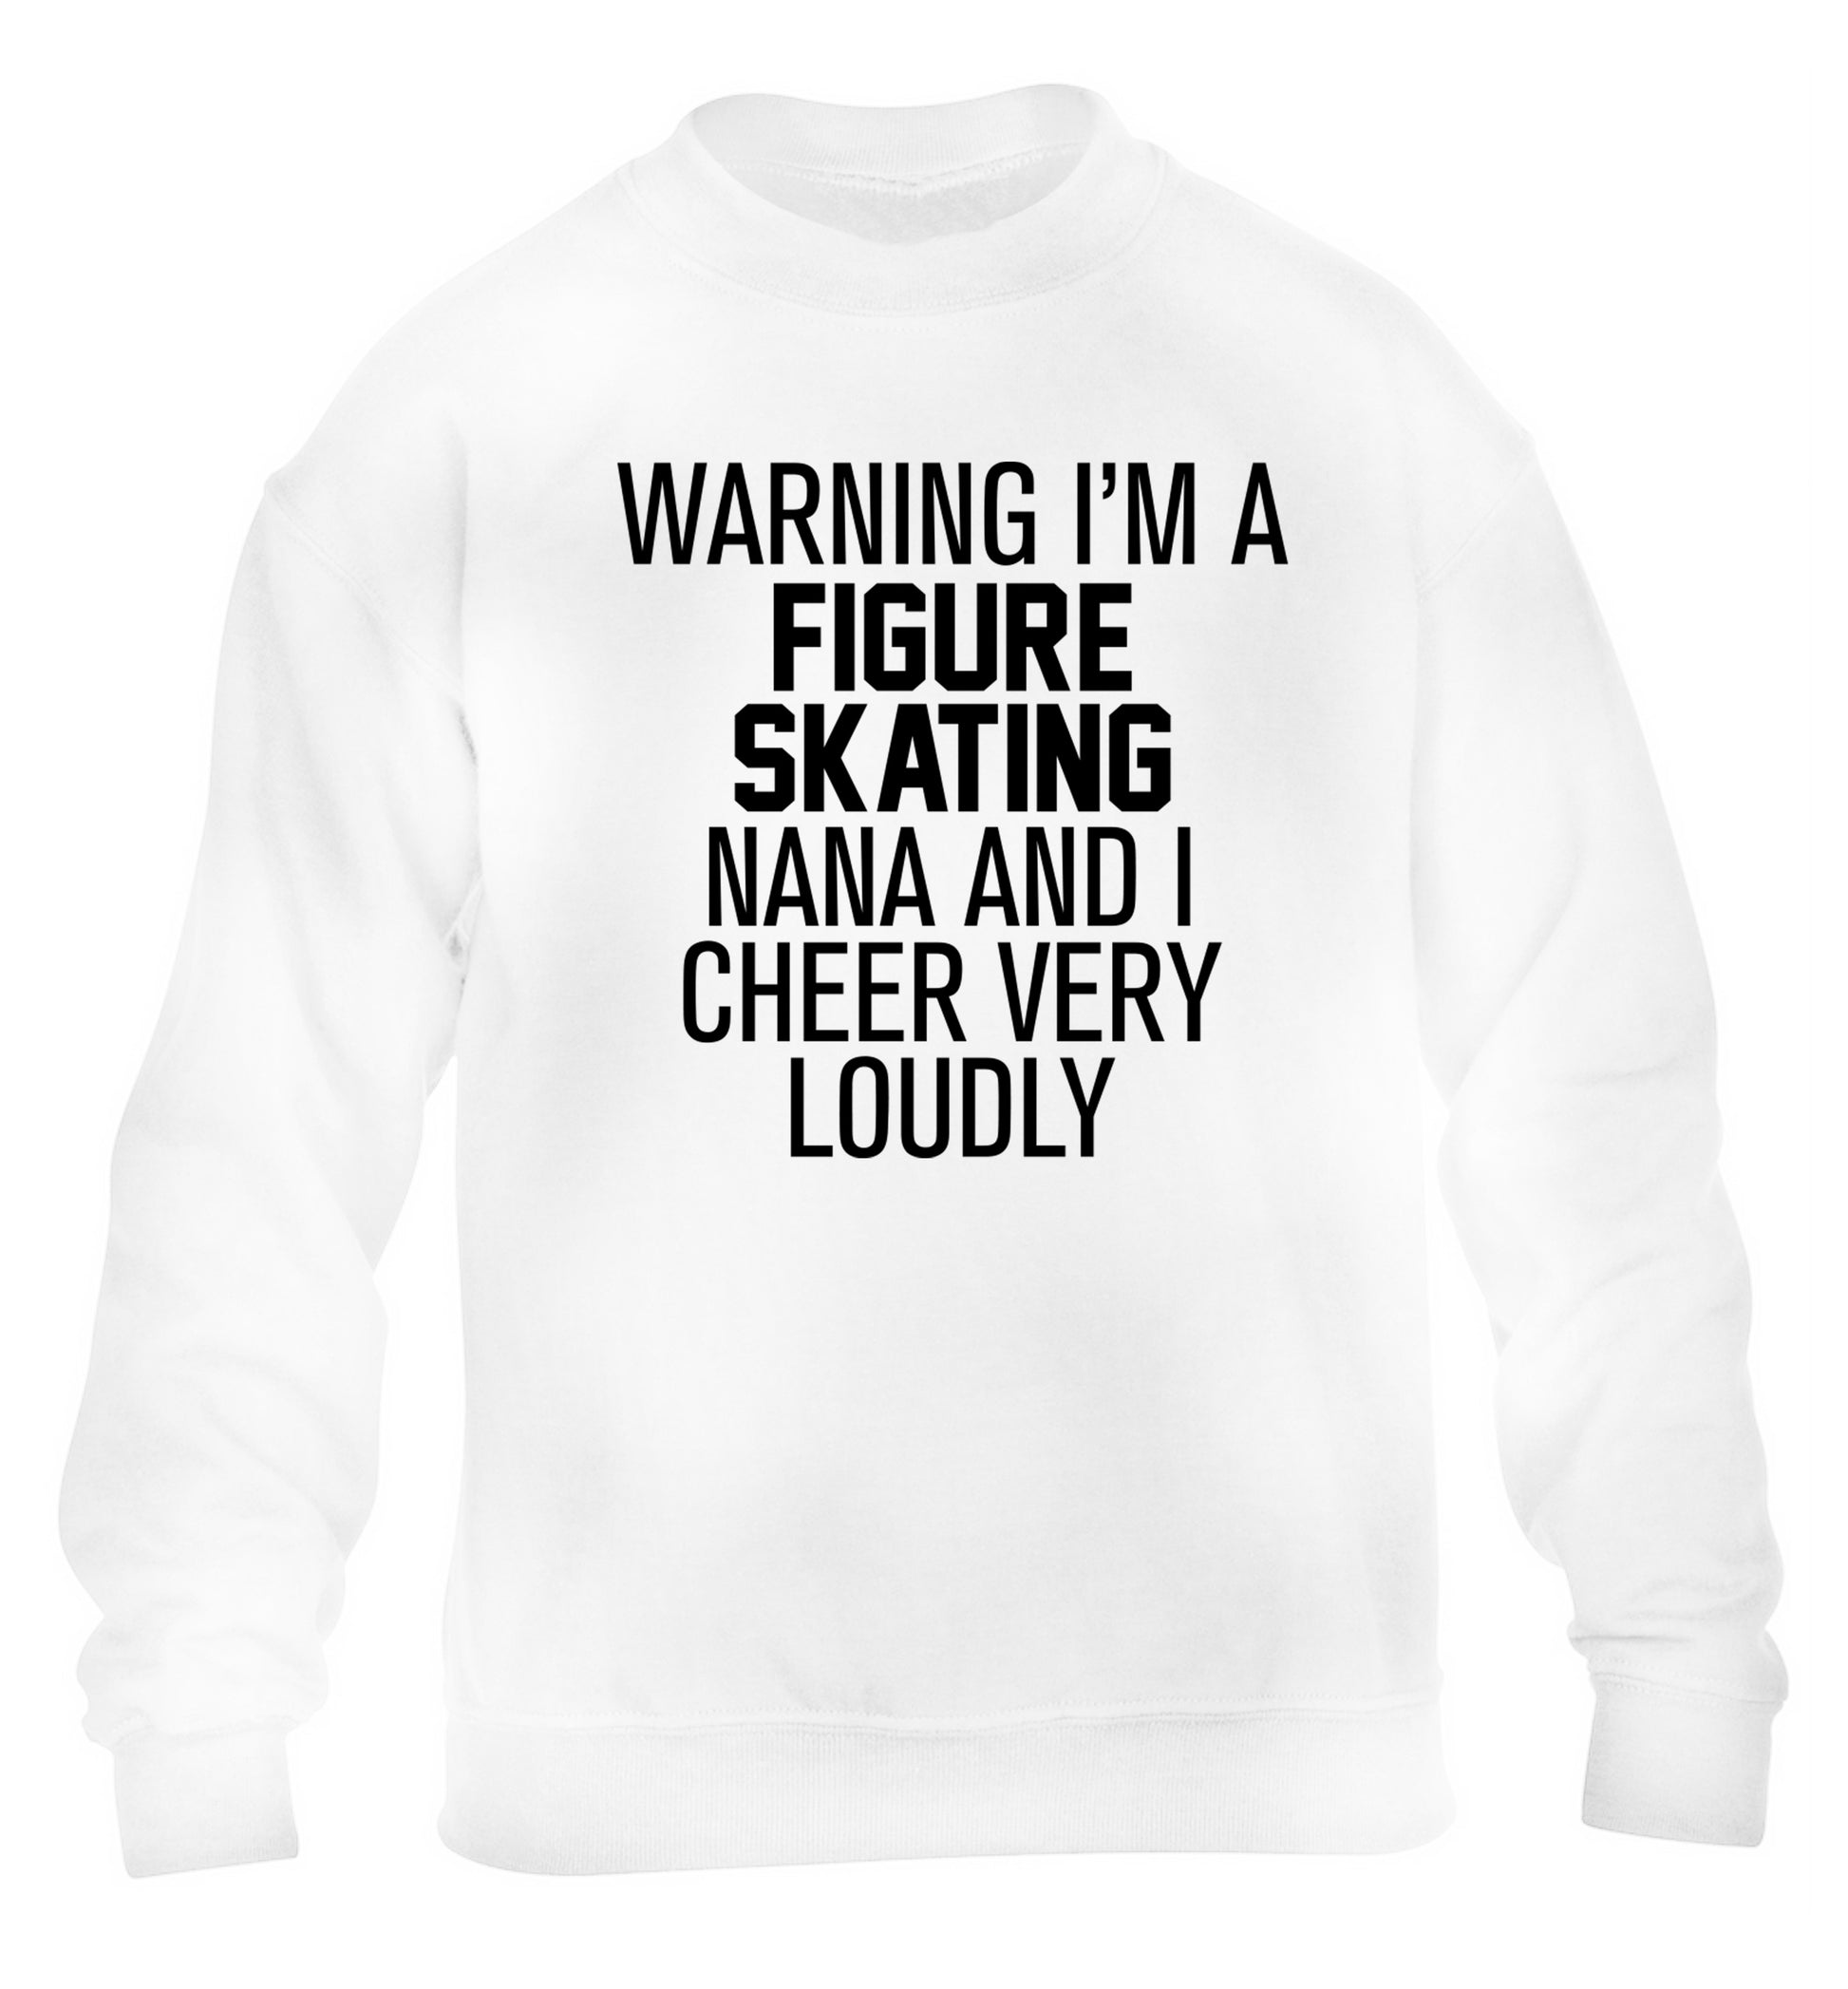 Warning I'm a figure skating nana and I cheer very loudly children's white sweater 12-14 Years